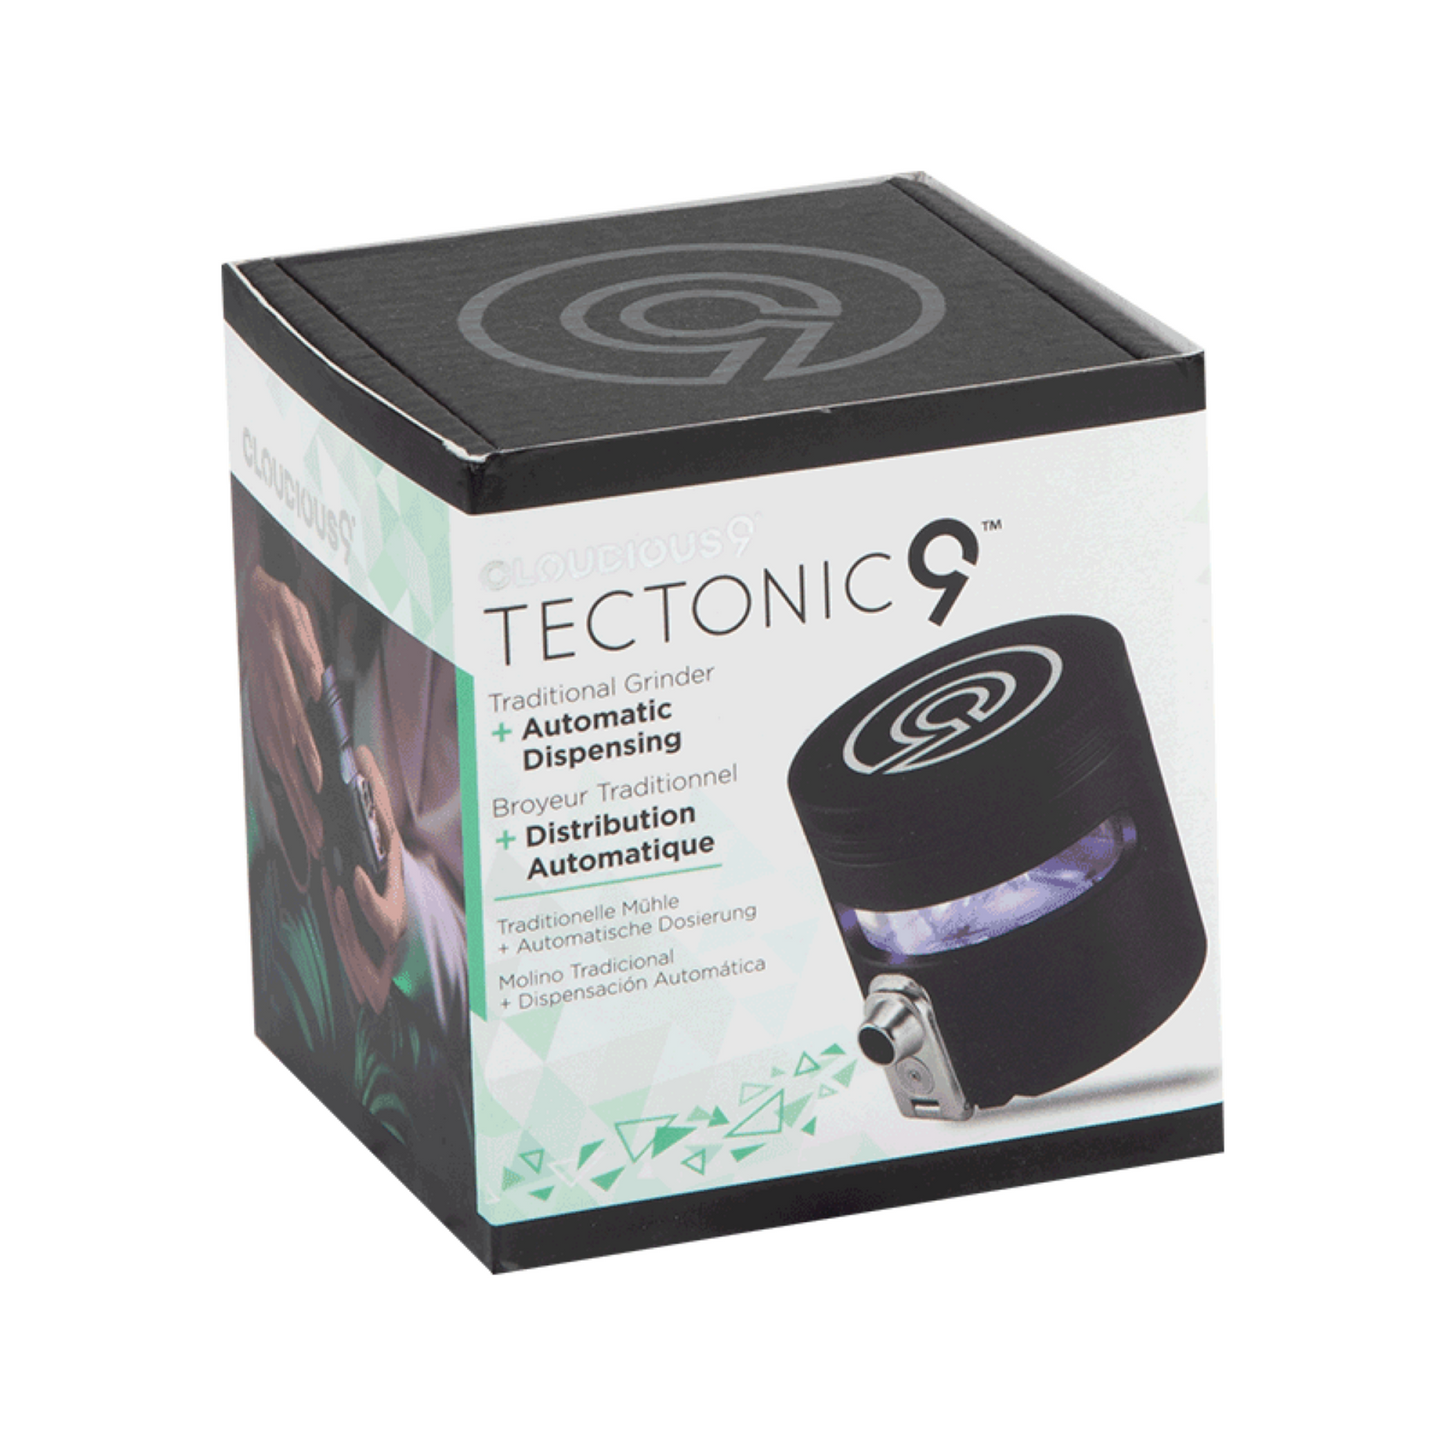 Tectonic9 Auto Dispensing Grinder by Cloudious9 | Mission Dispensary